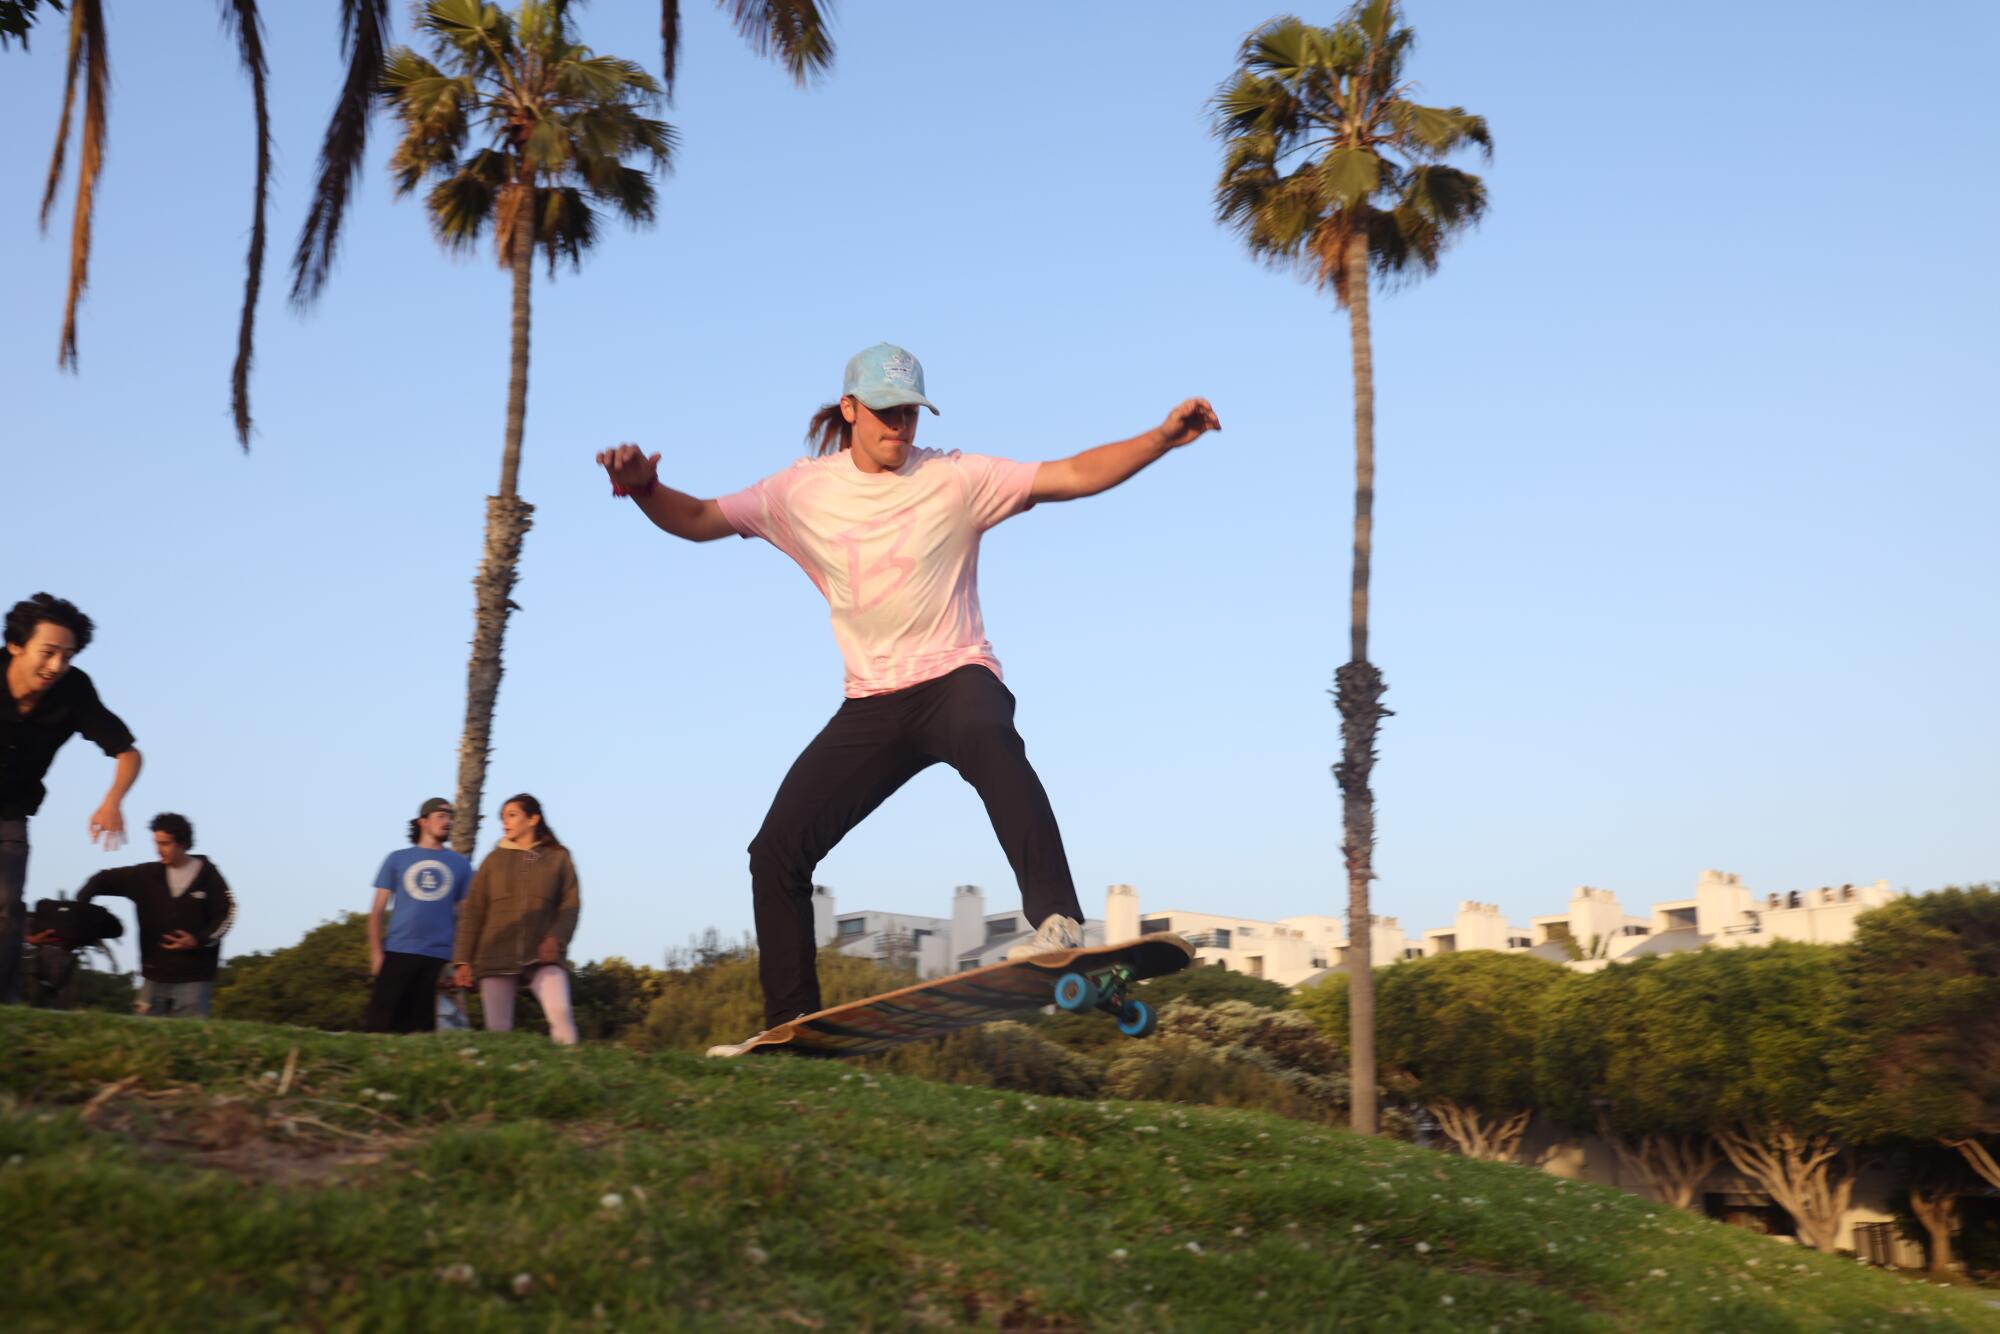 Brandon DesJarlais makes his way down the grassy hill during a meetup with Vibe Ride LA at Ocean View Park.